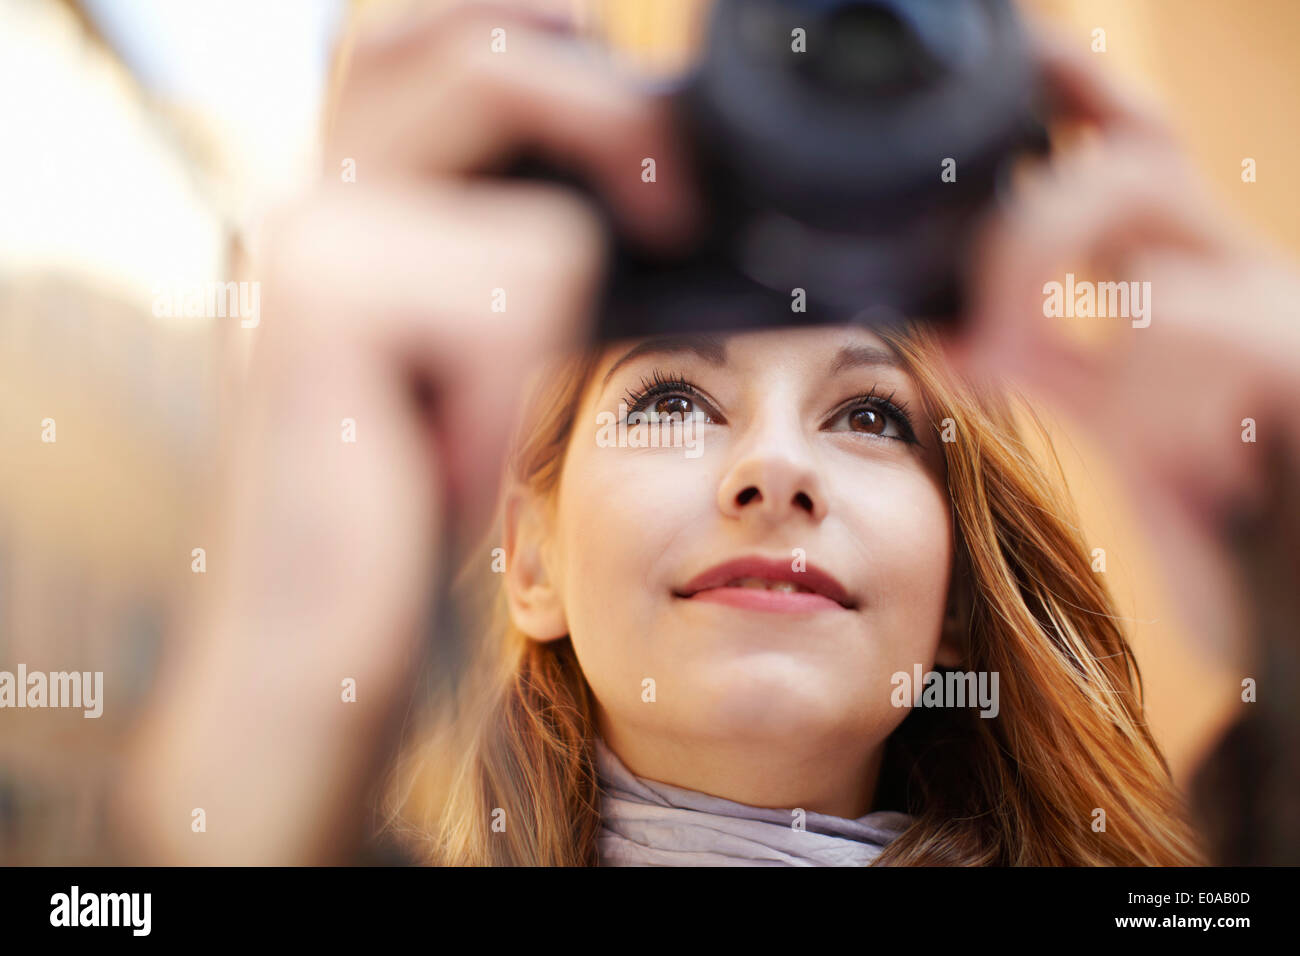 Close up of young woman photographing with digital camera Banque D'Images